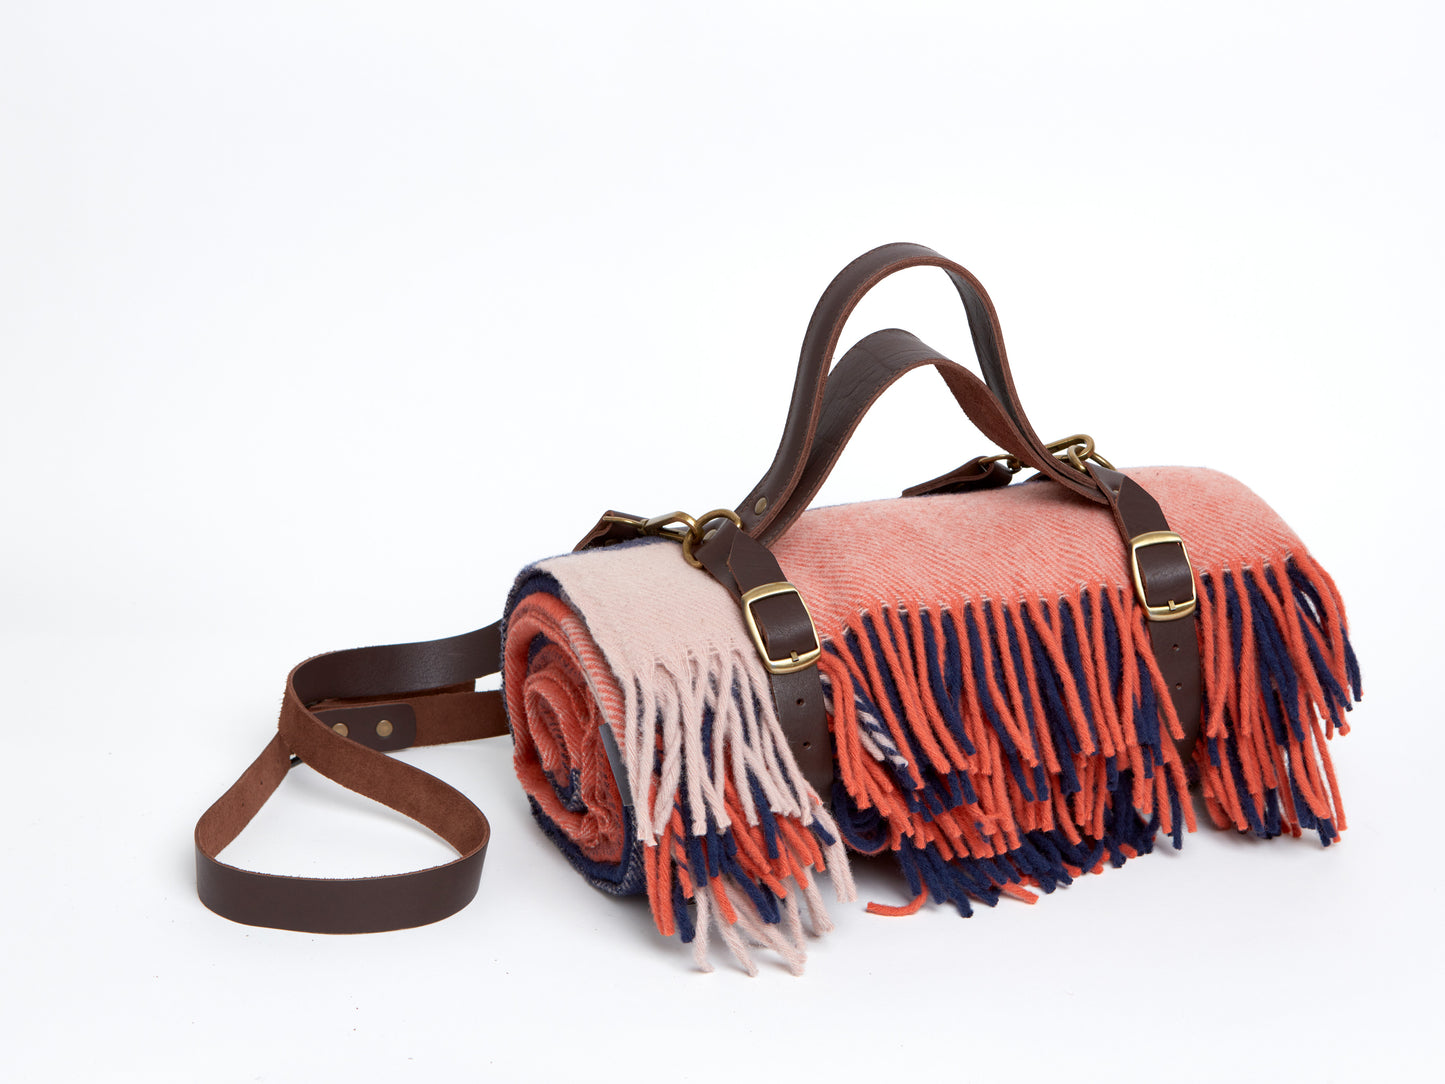 WAVERLEY MILLS MERINO WOOL PICNIC RUG - GRAZE, CAMEO ROSE, EMBERGLOW & ECLIPSE, 152 x 170cm, WITH LEATHER CARRIER AND SHOULDER STRAP.